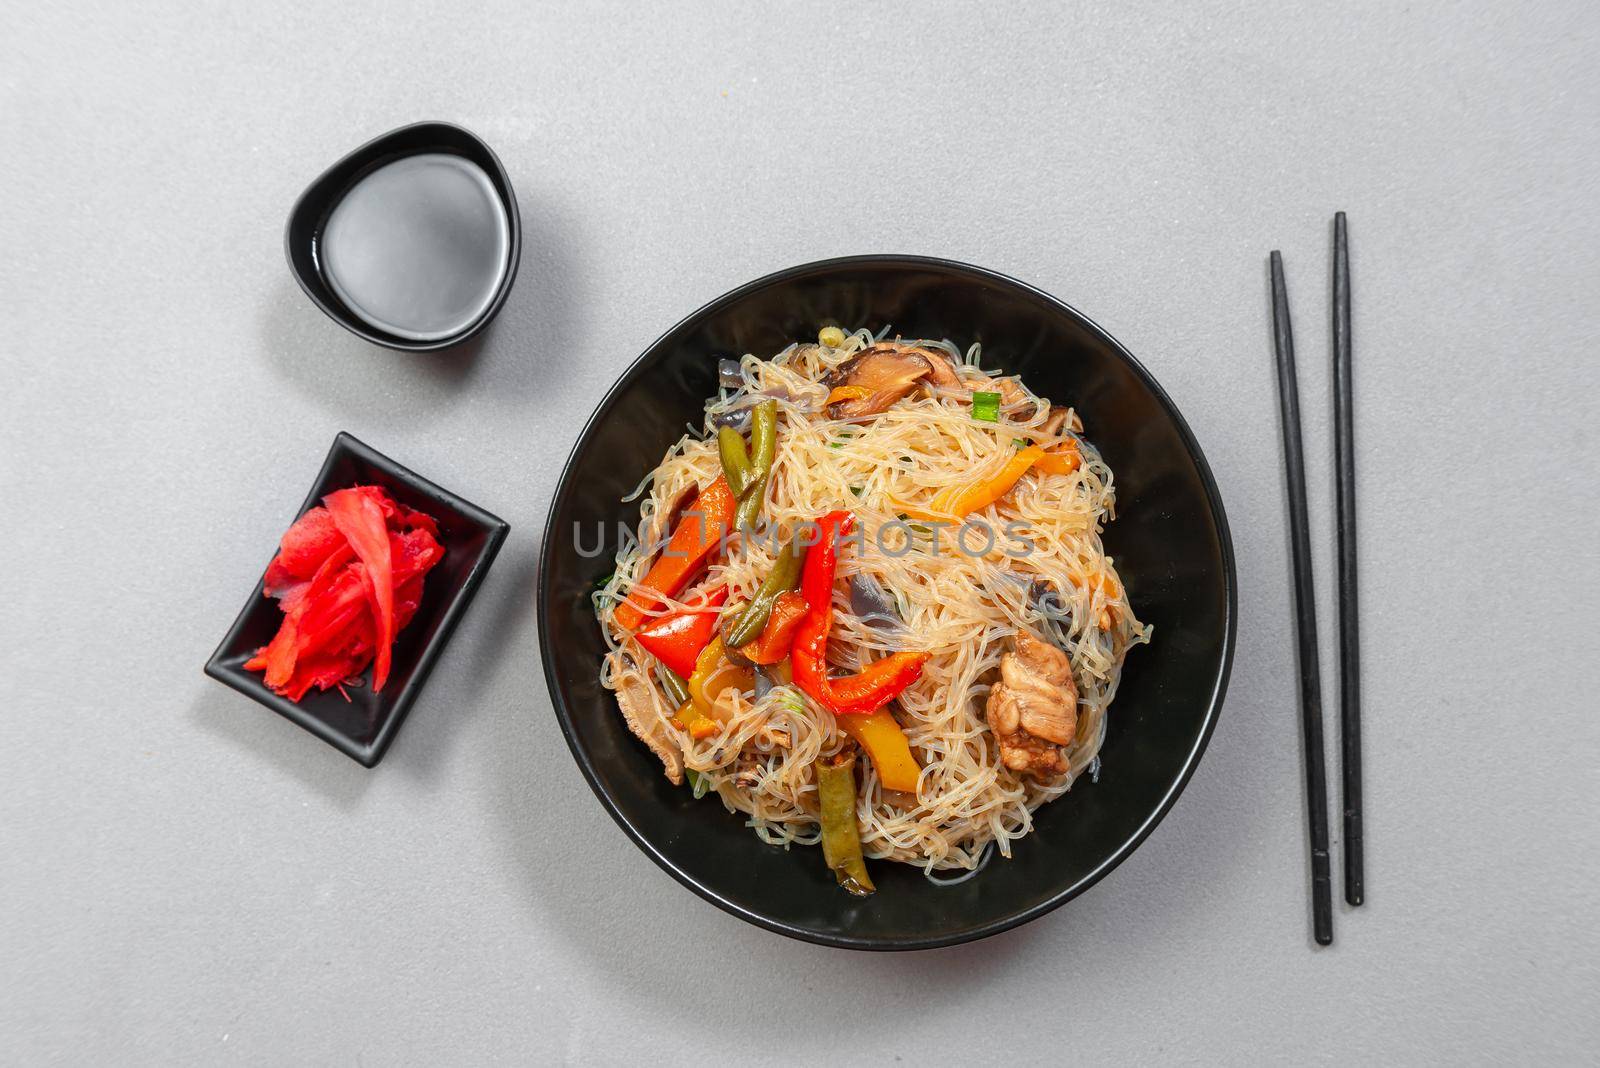 Glass noodle with vegetable in a black bowl on a grey background. Asian food Asian cuisine. Asian or Szechuan noodles